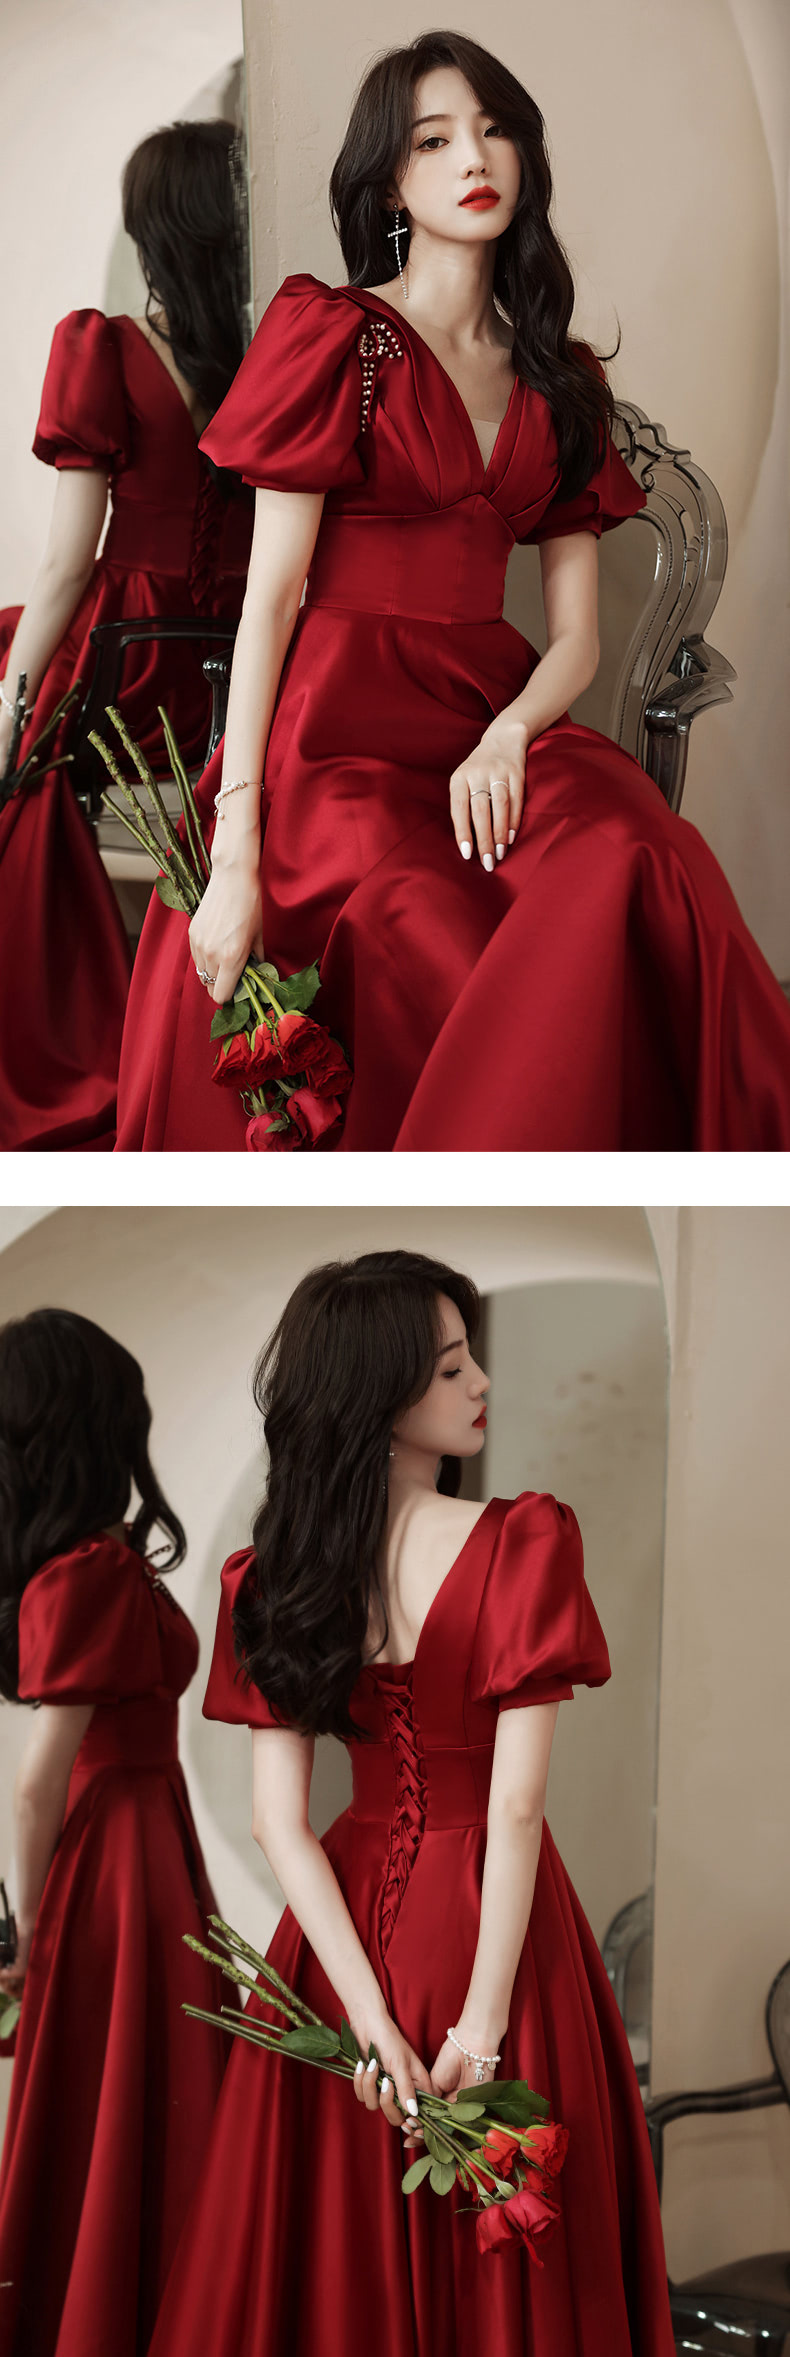 Satin-Junior-Senior-Prom-Gown-Evening-Long-Dress-with-Sleeves14.jpg